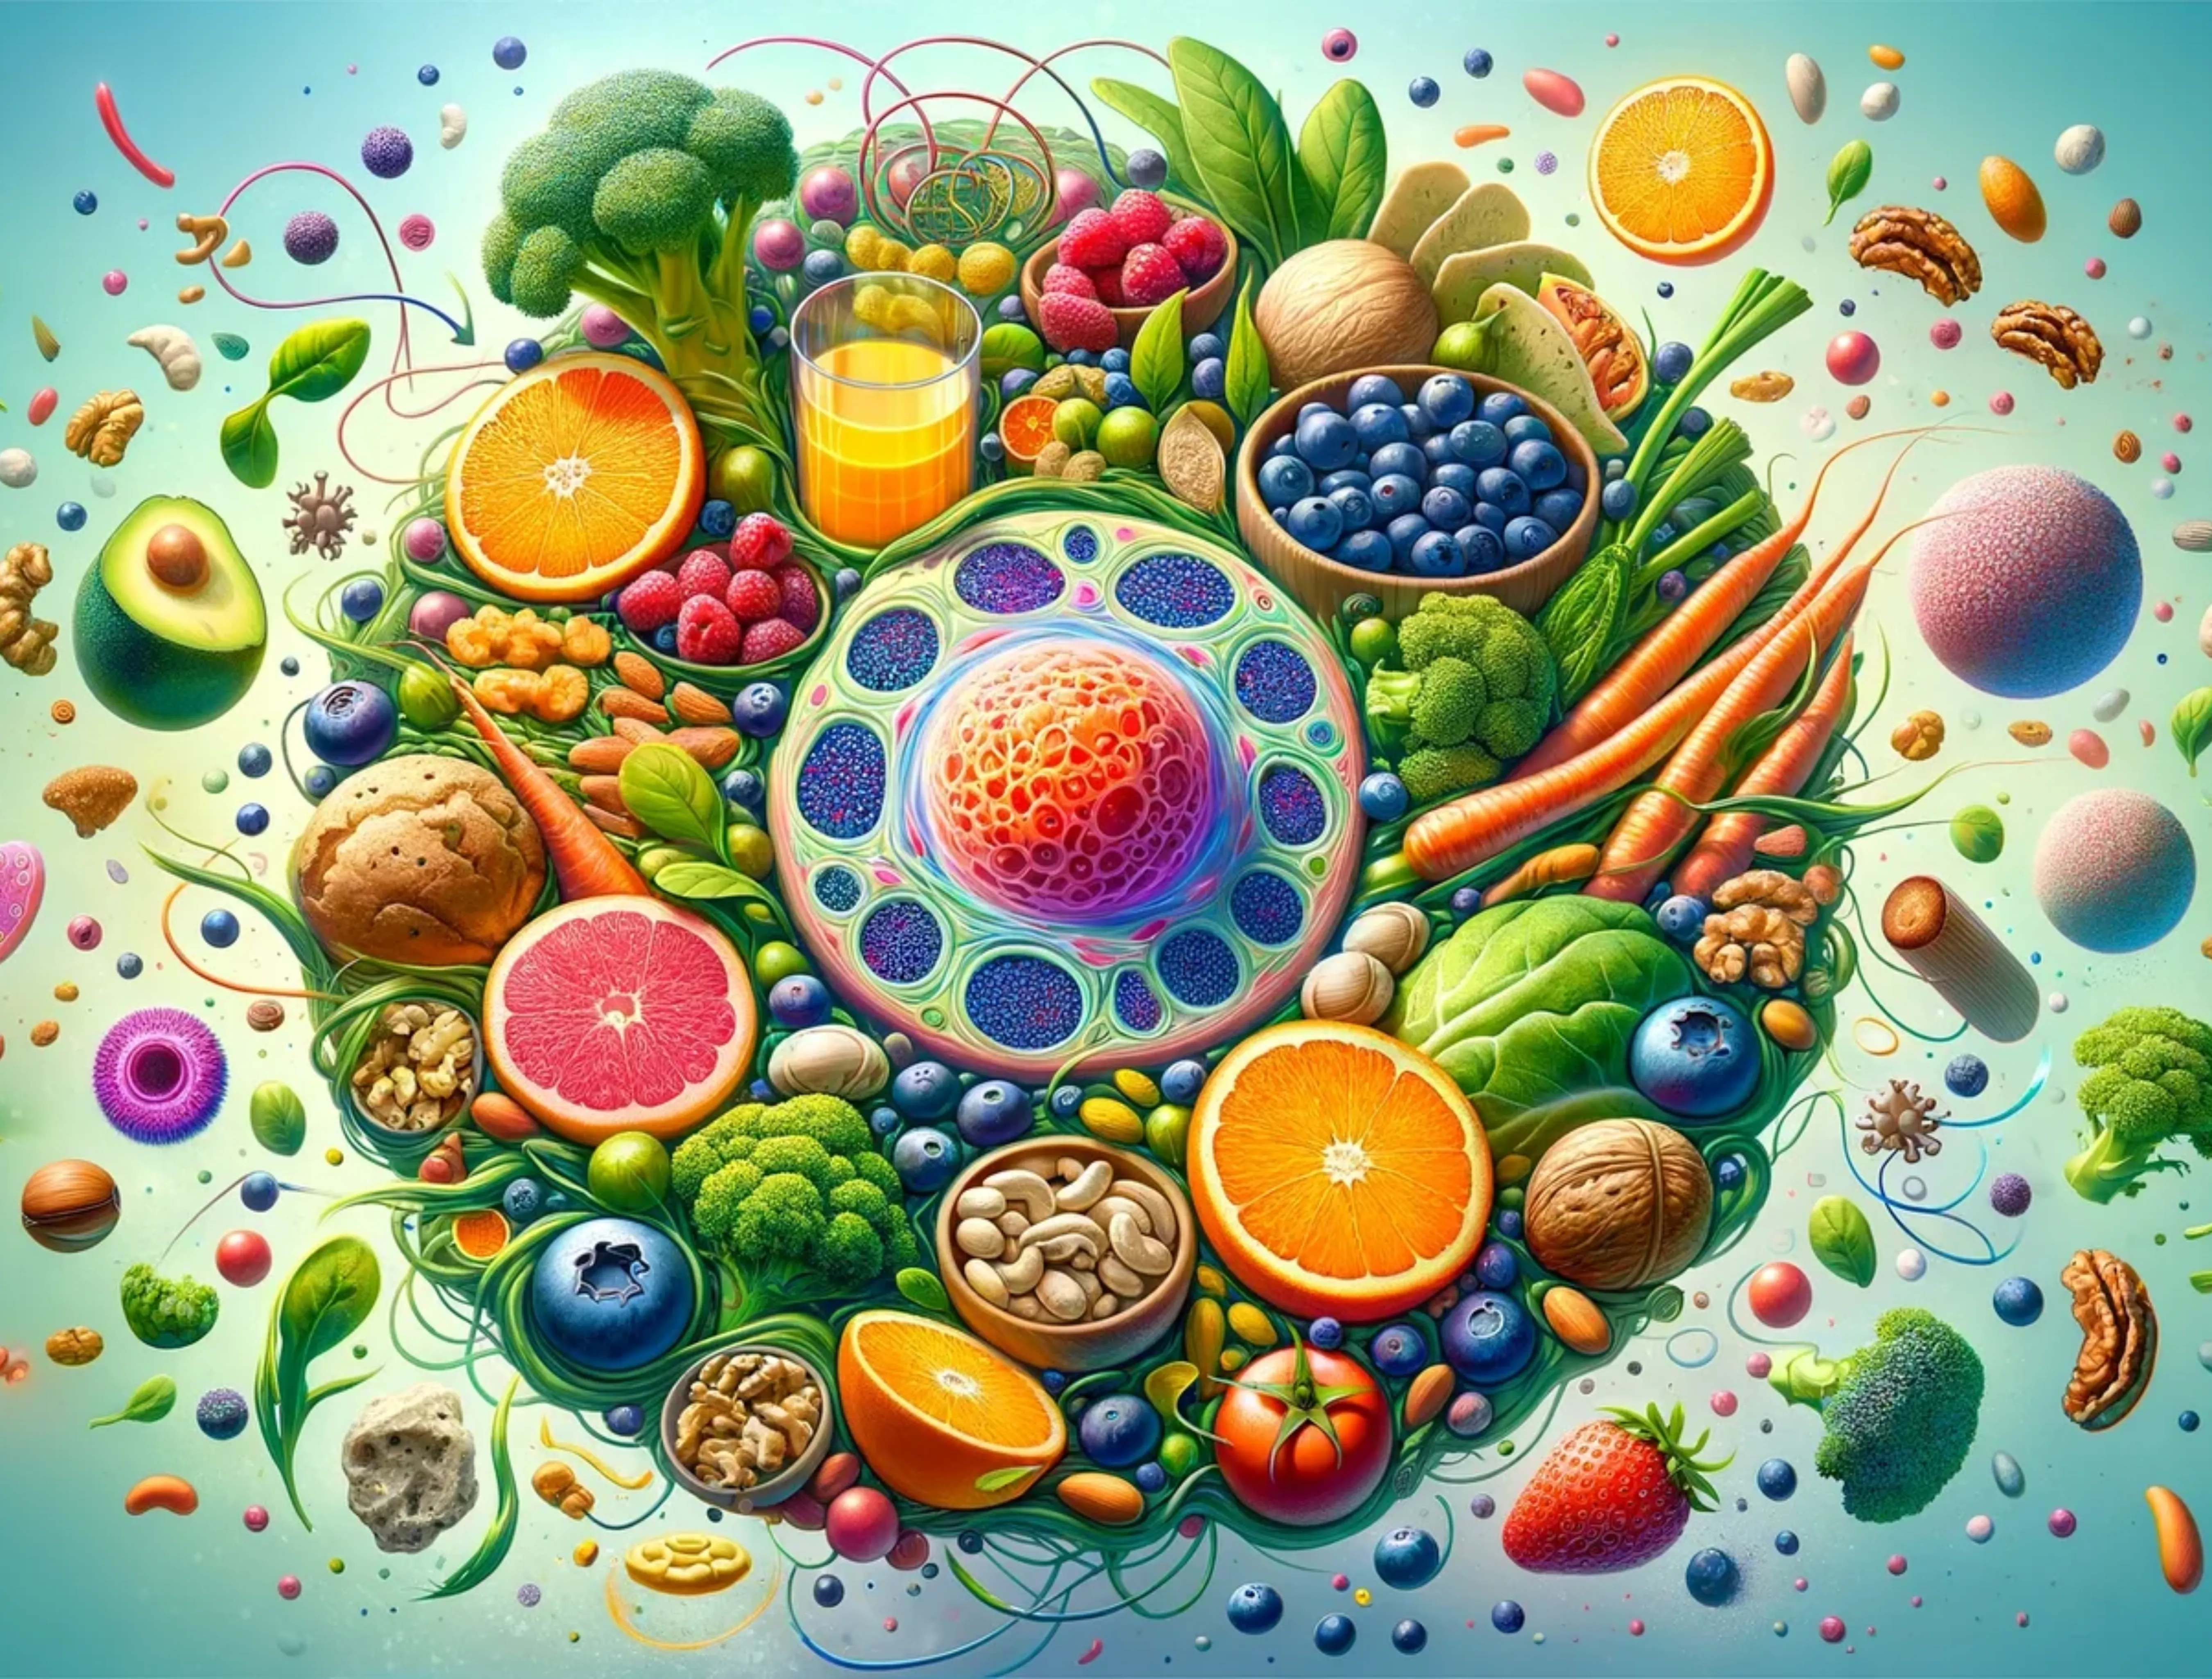 image of foods that heal cells